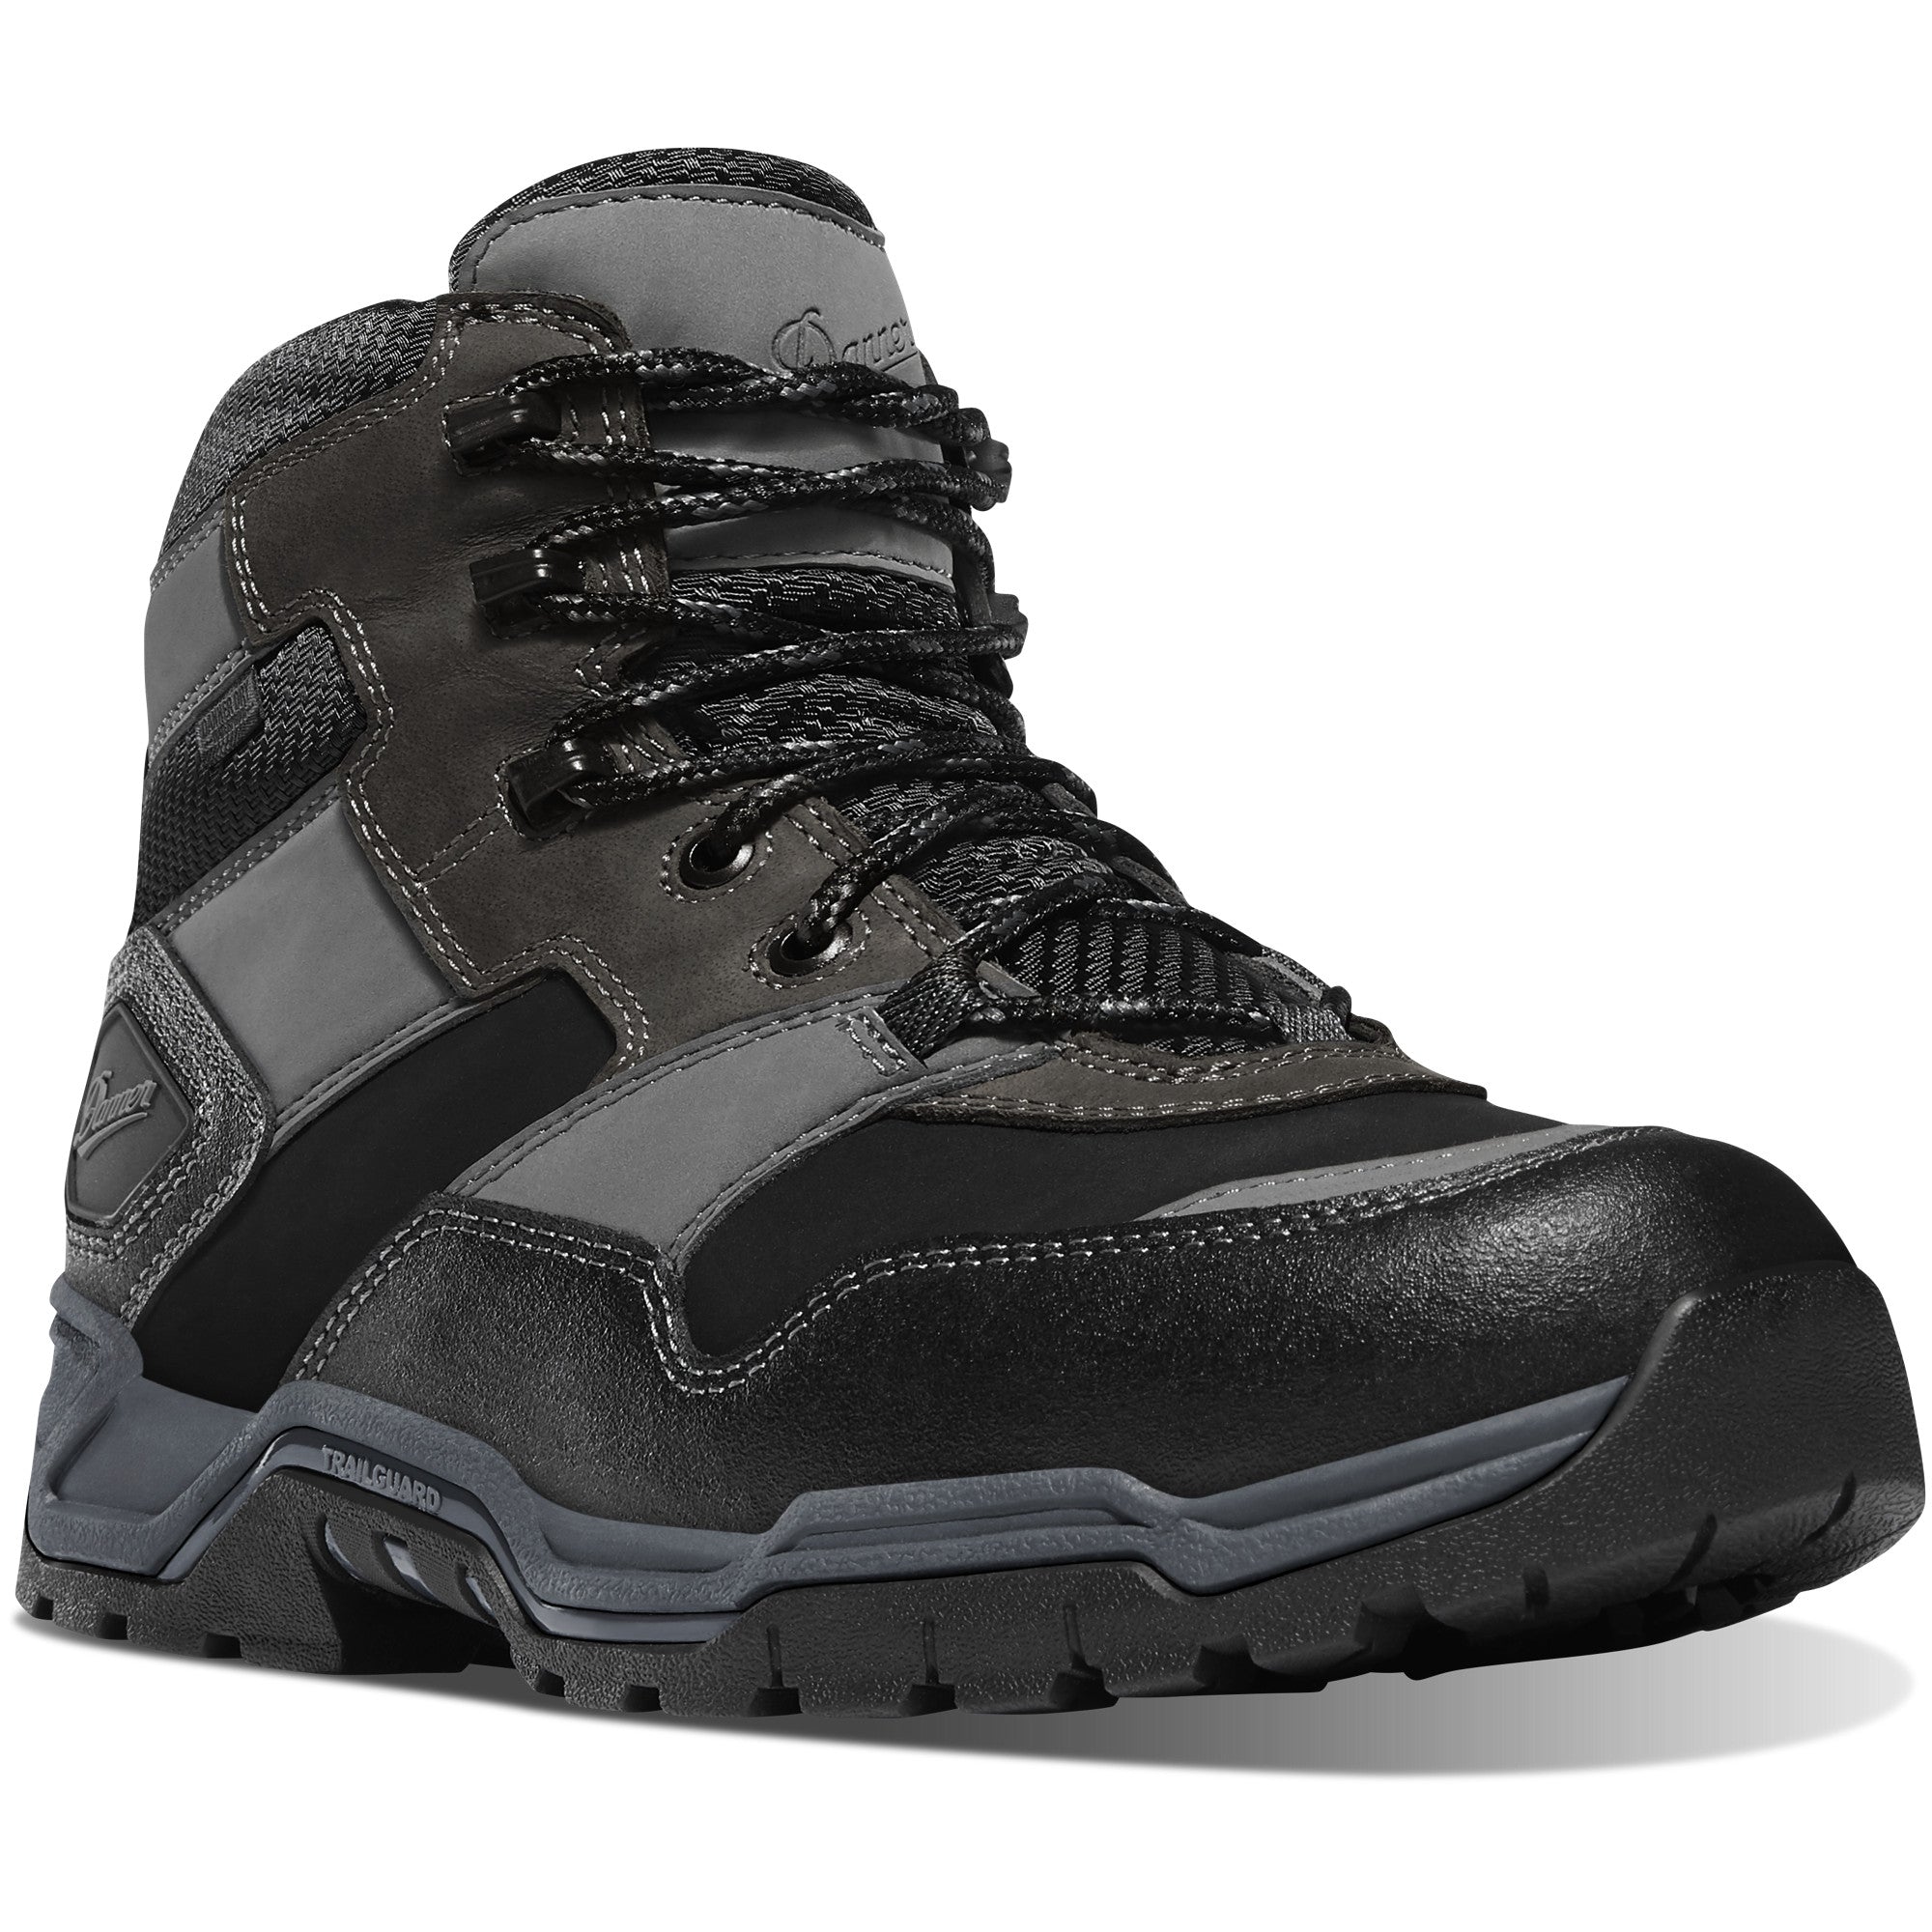 Danner Men's Field Ranger 6" Waterproof Composite Safety Toe Work Boot in Gray from the side